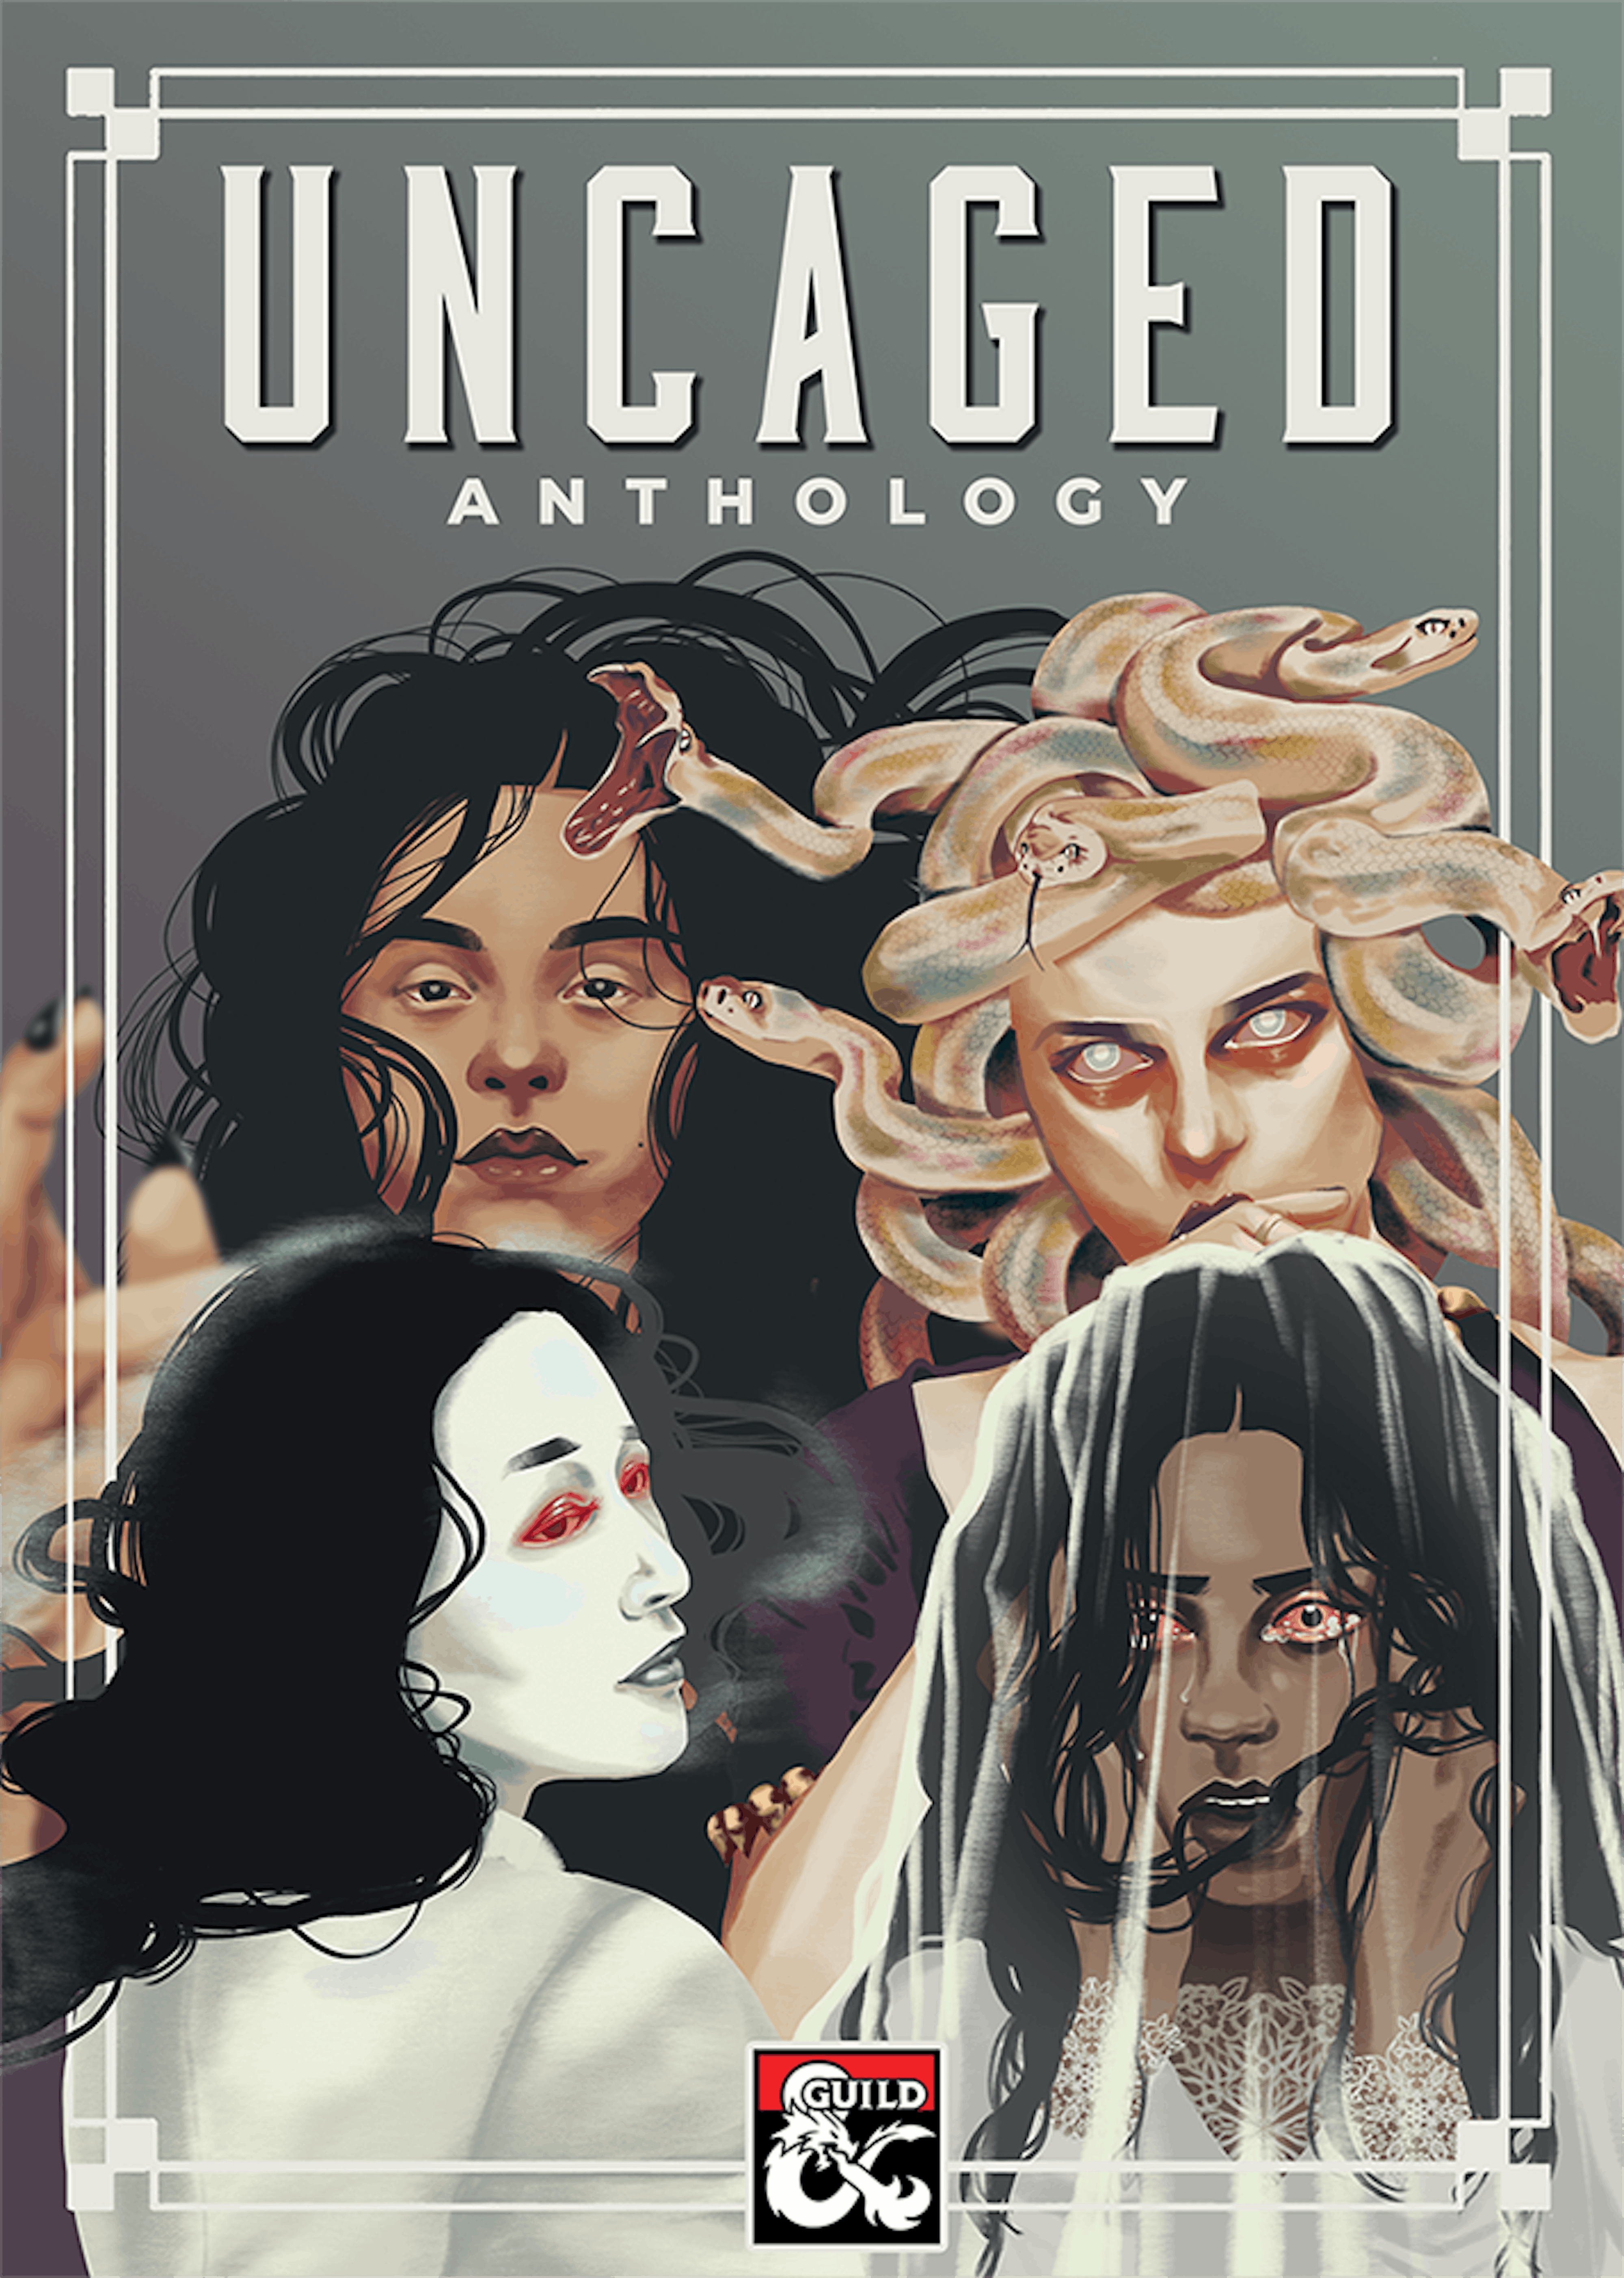 Cover of the bundled version of the Uncaged anthology series, featuring Medusa (vol. 1), Rusalka (vol. 2), Yuki-Onna (vol. 3) and La Llorona (vol. 4). Illustrations by Samantha Darcy. 